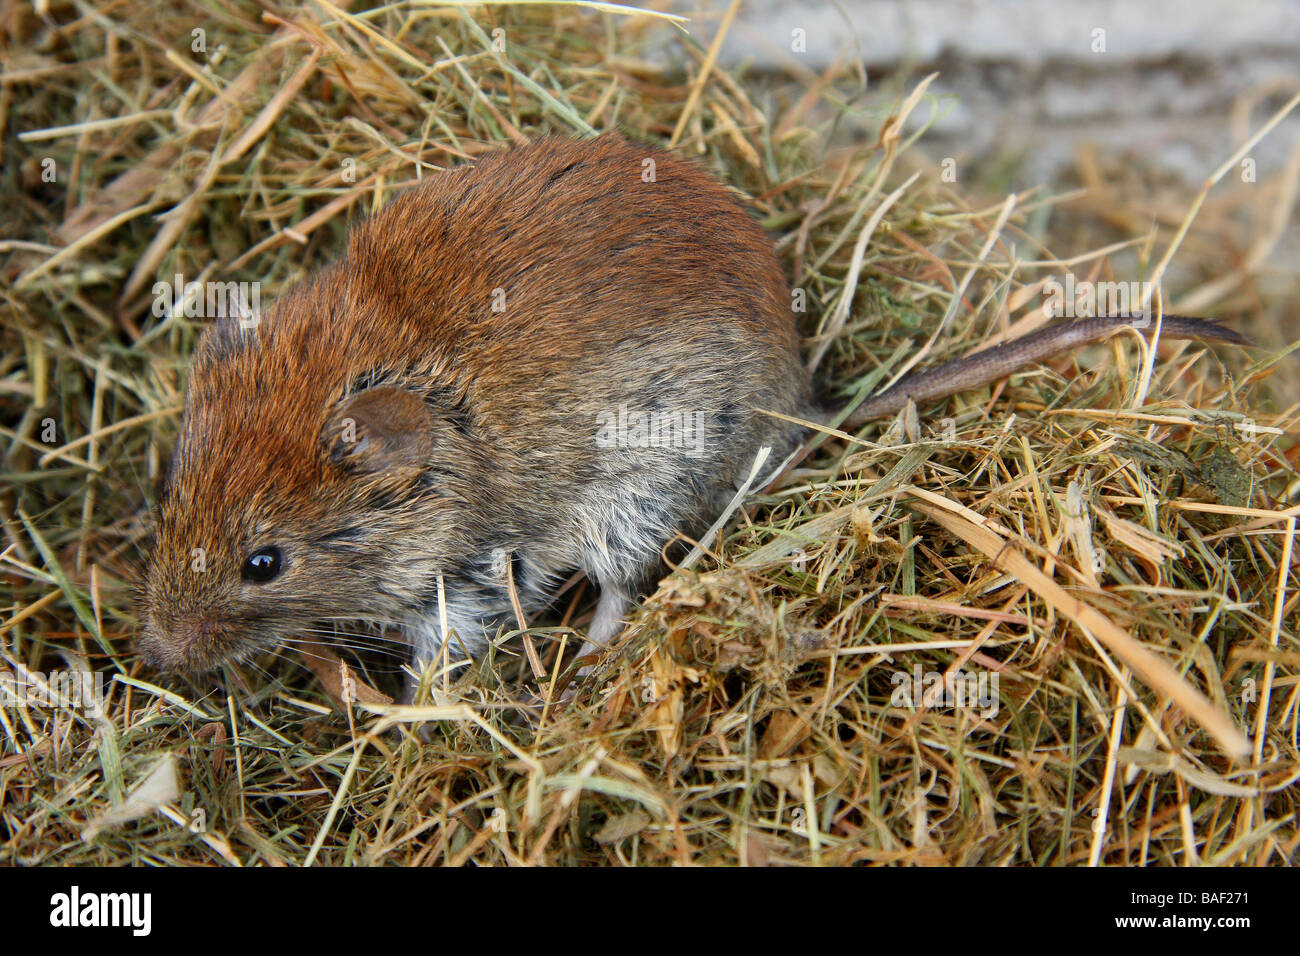 A vole on a pile of dried grass Limousin France Stock Photo